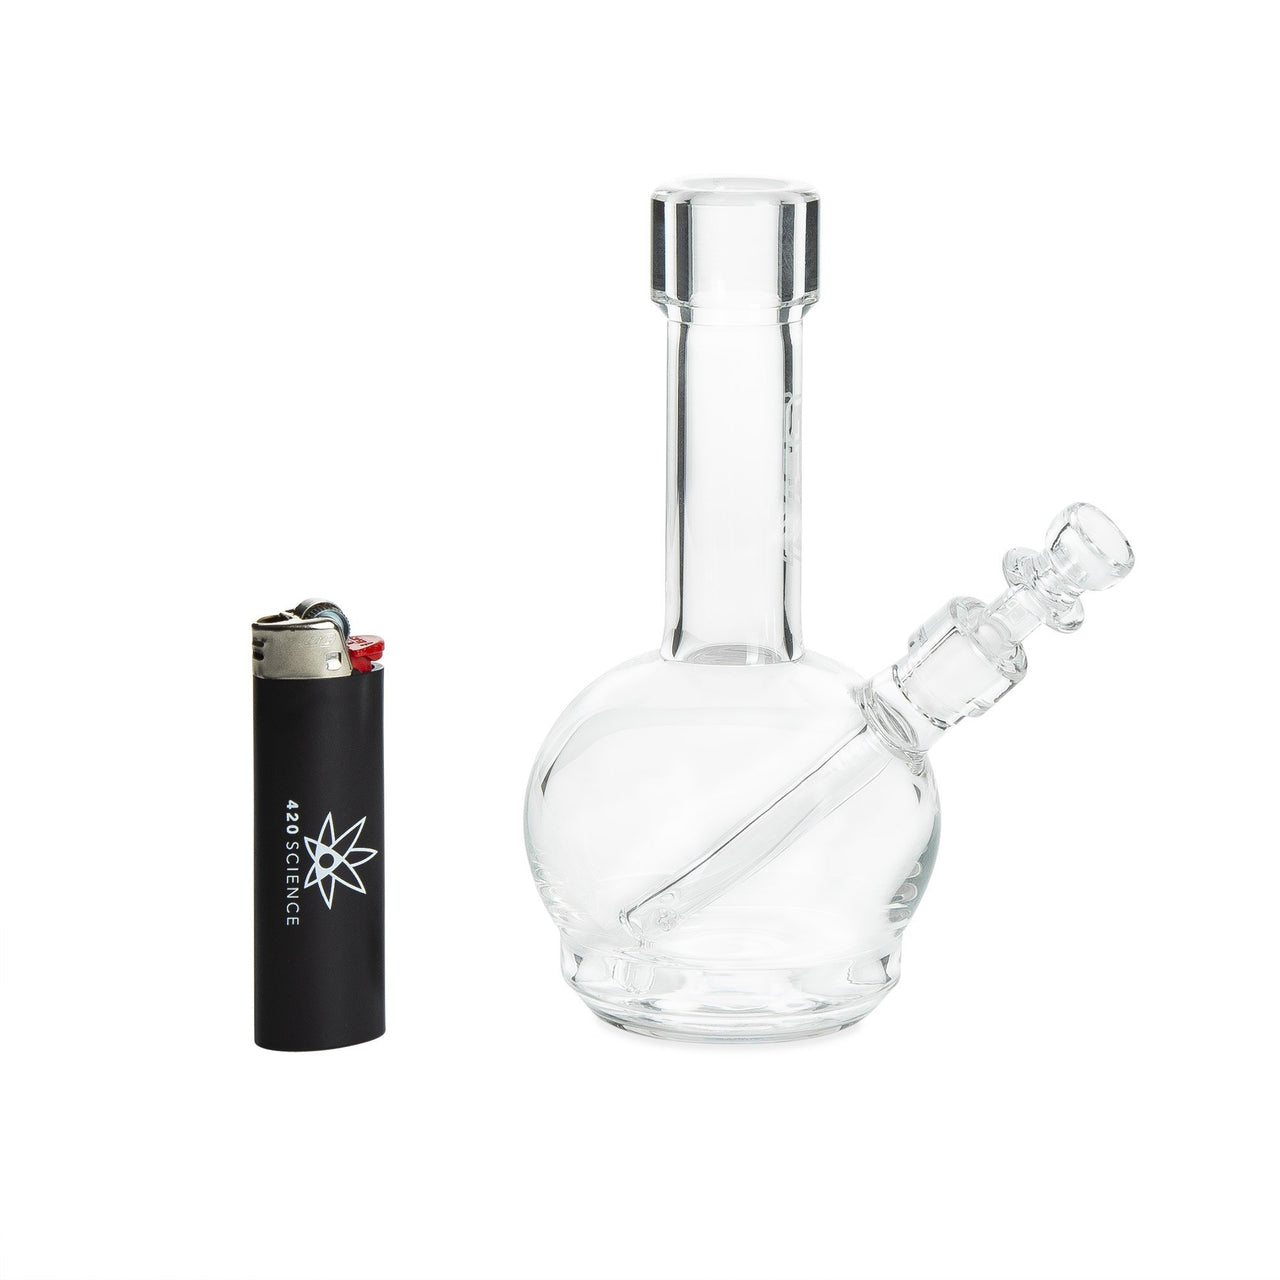 GRAV 6in Round Base - 420 Science - The most trusted online smoke shop.